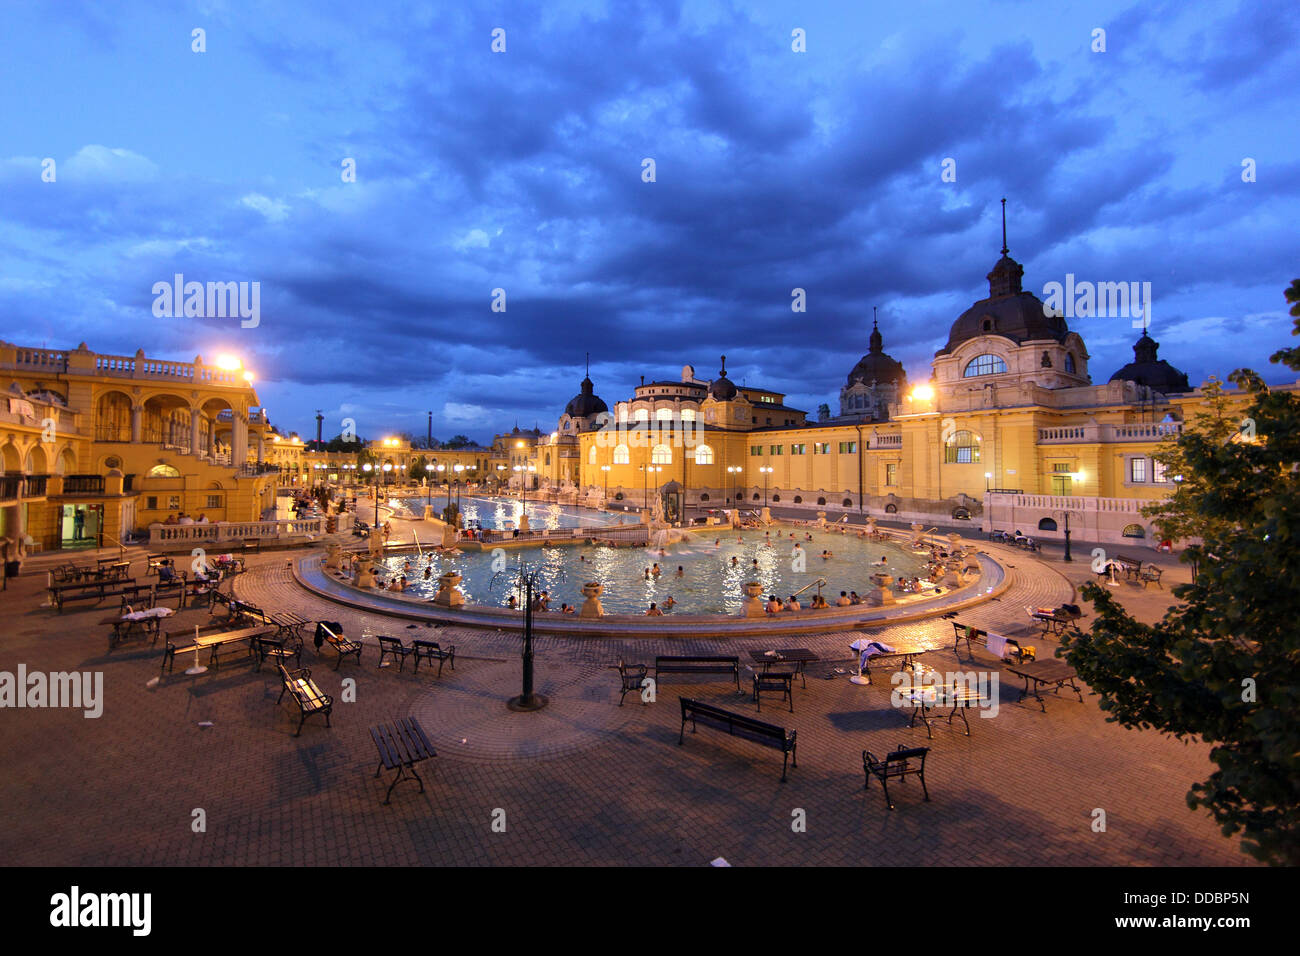 Budapest, Hungary Szechenyi thermal baths in the evening Stock Photo